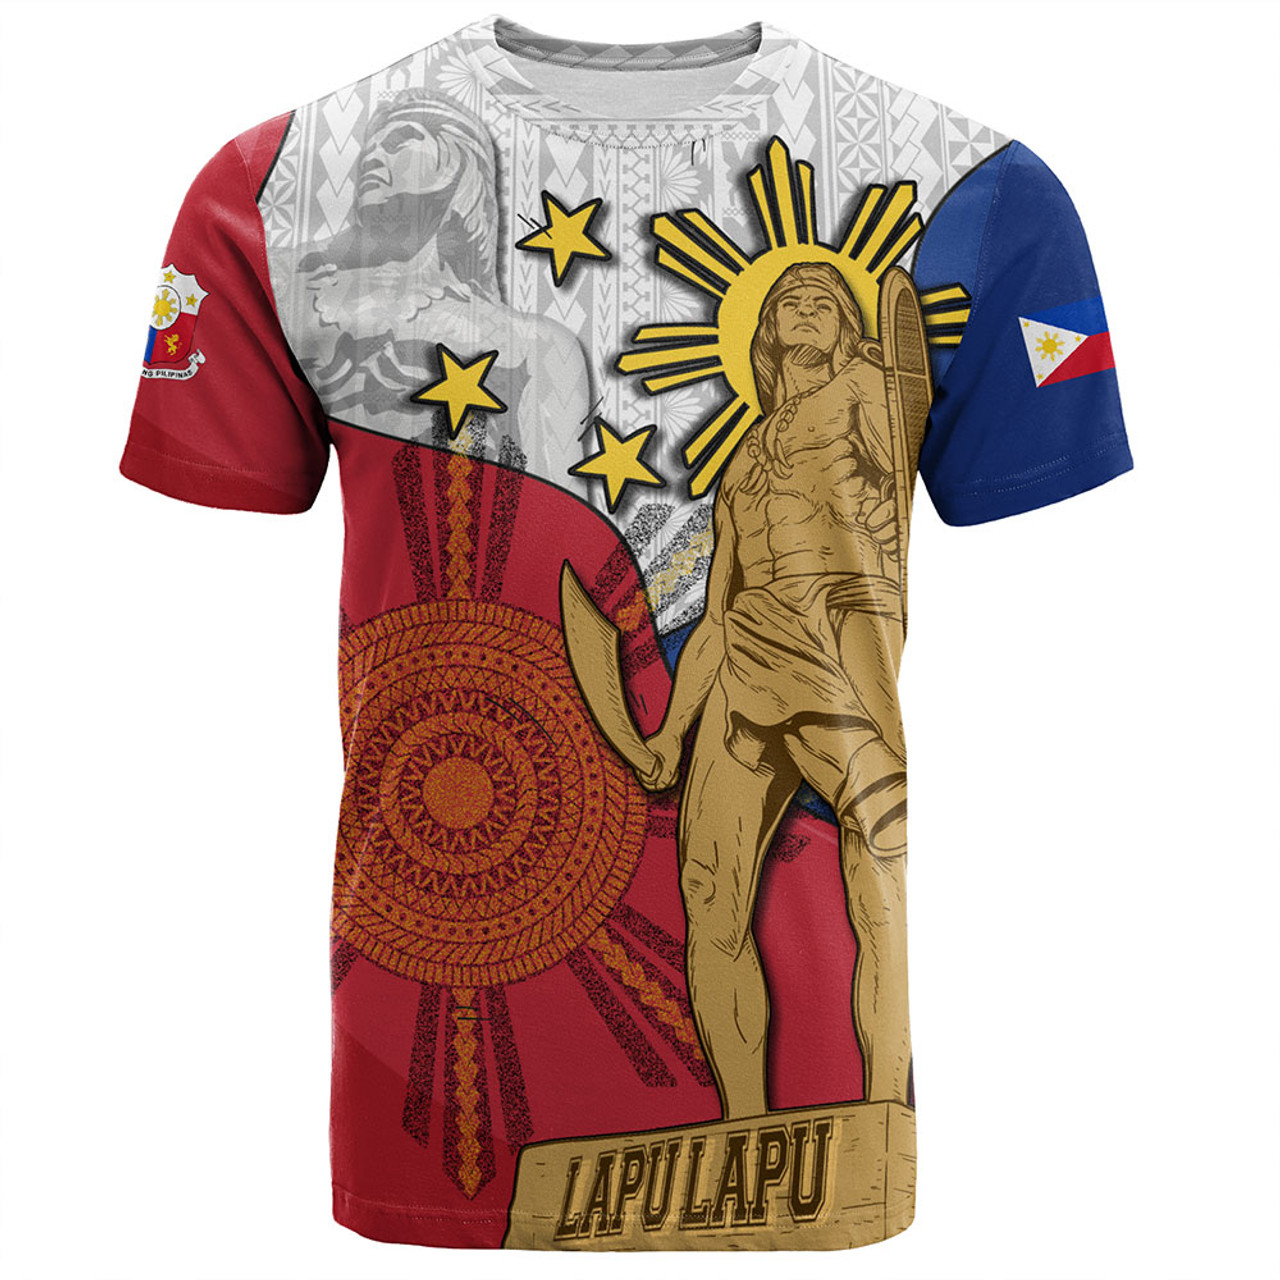 Philippines Filipinos T-Shirt Lapu Lapu Heroes With Sun And Flag Tribal Patterns